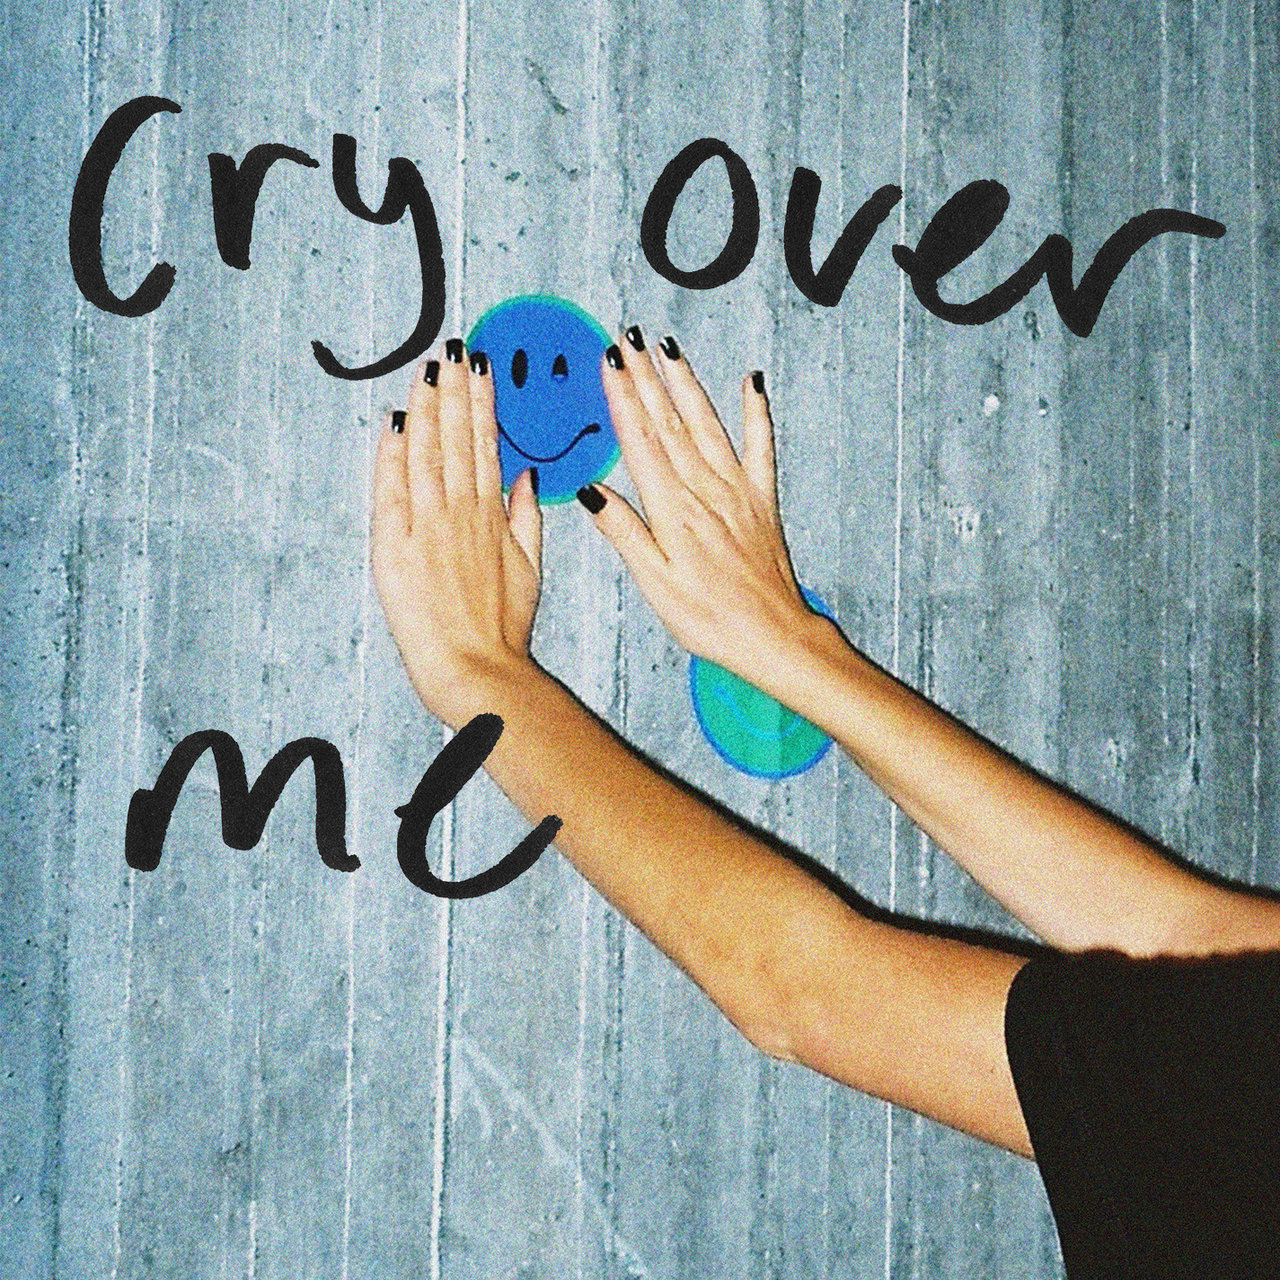 Rhys — Cry over me cover artwork